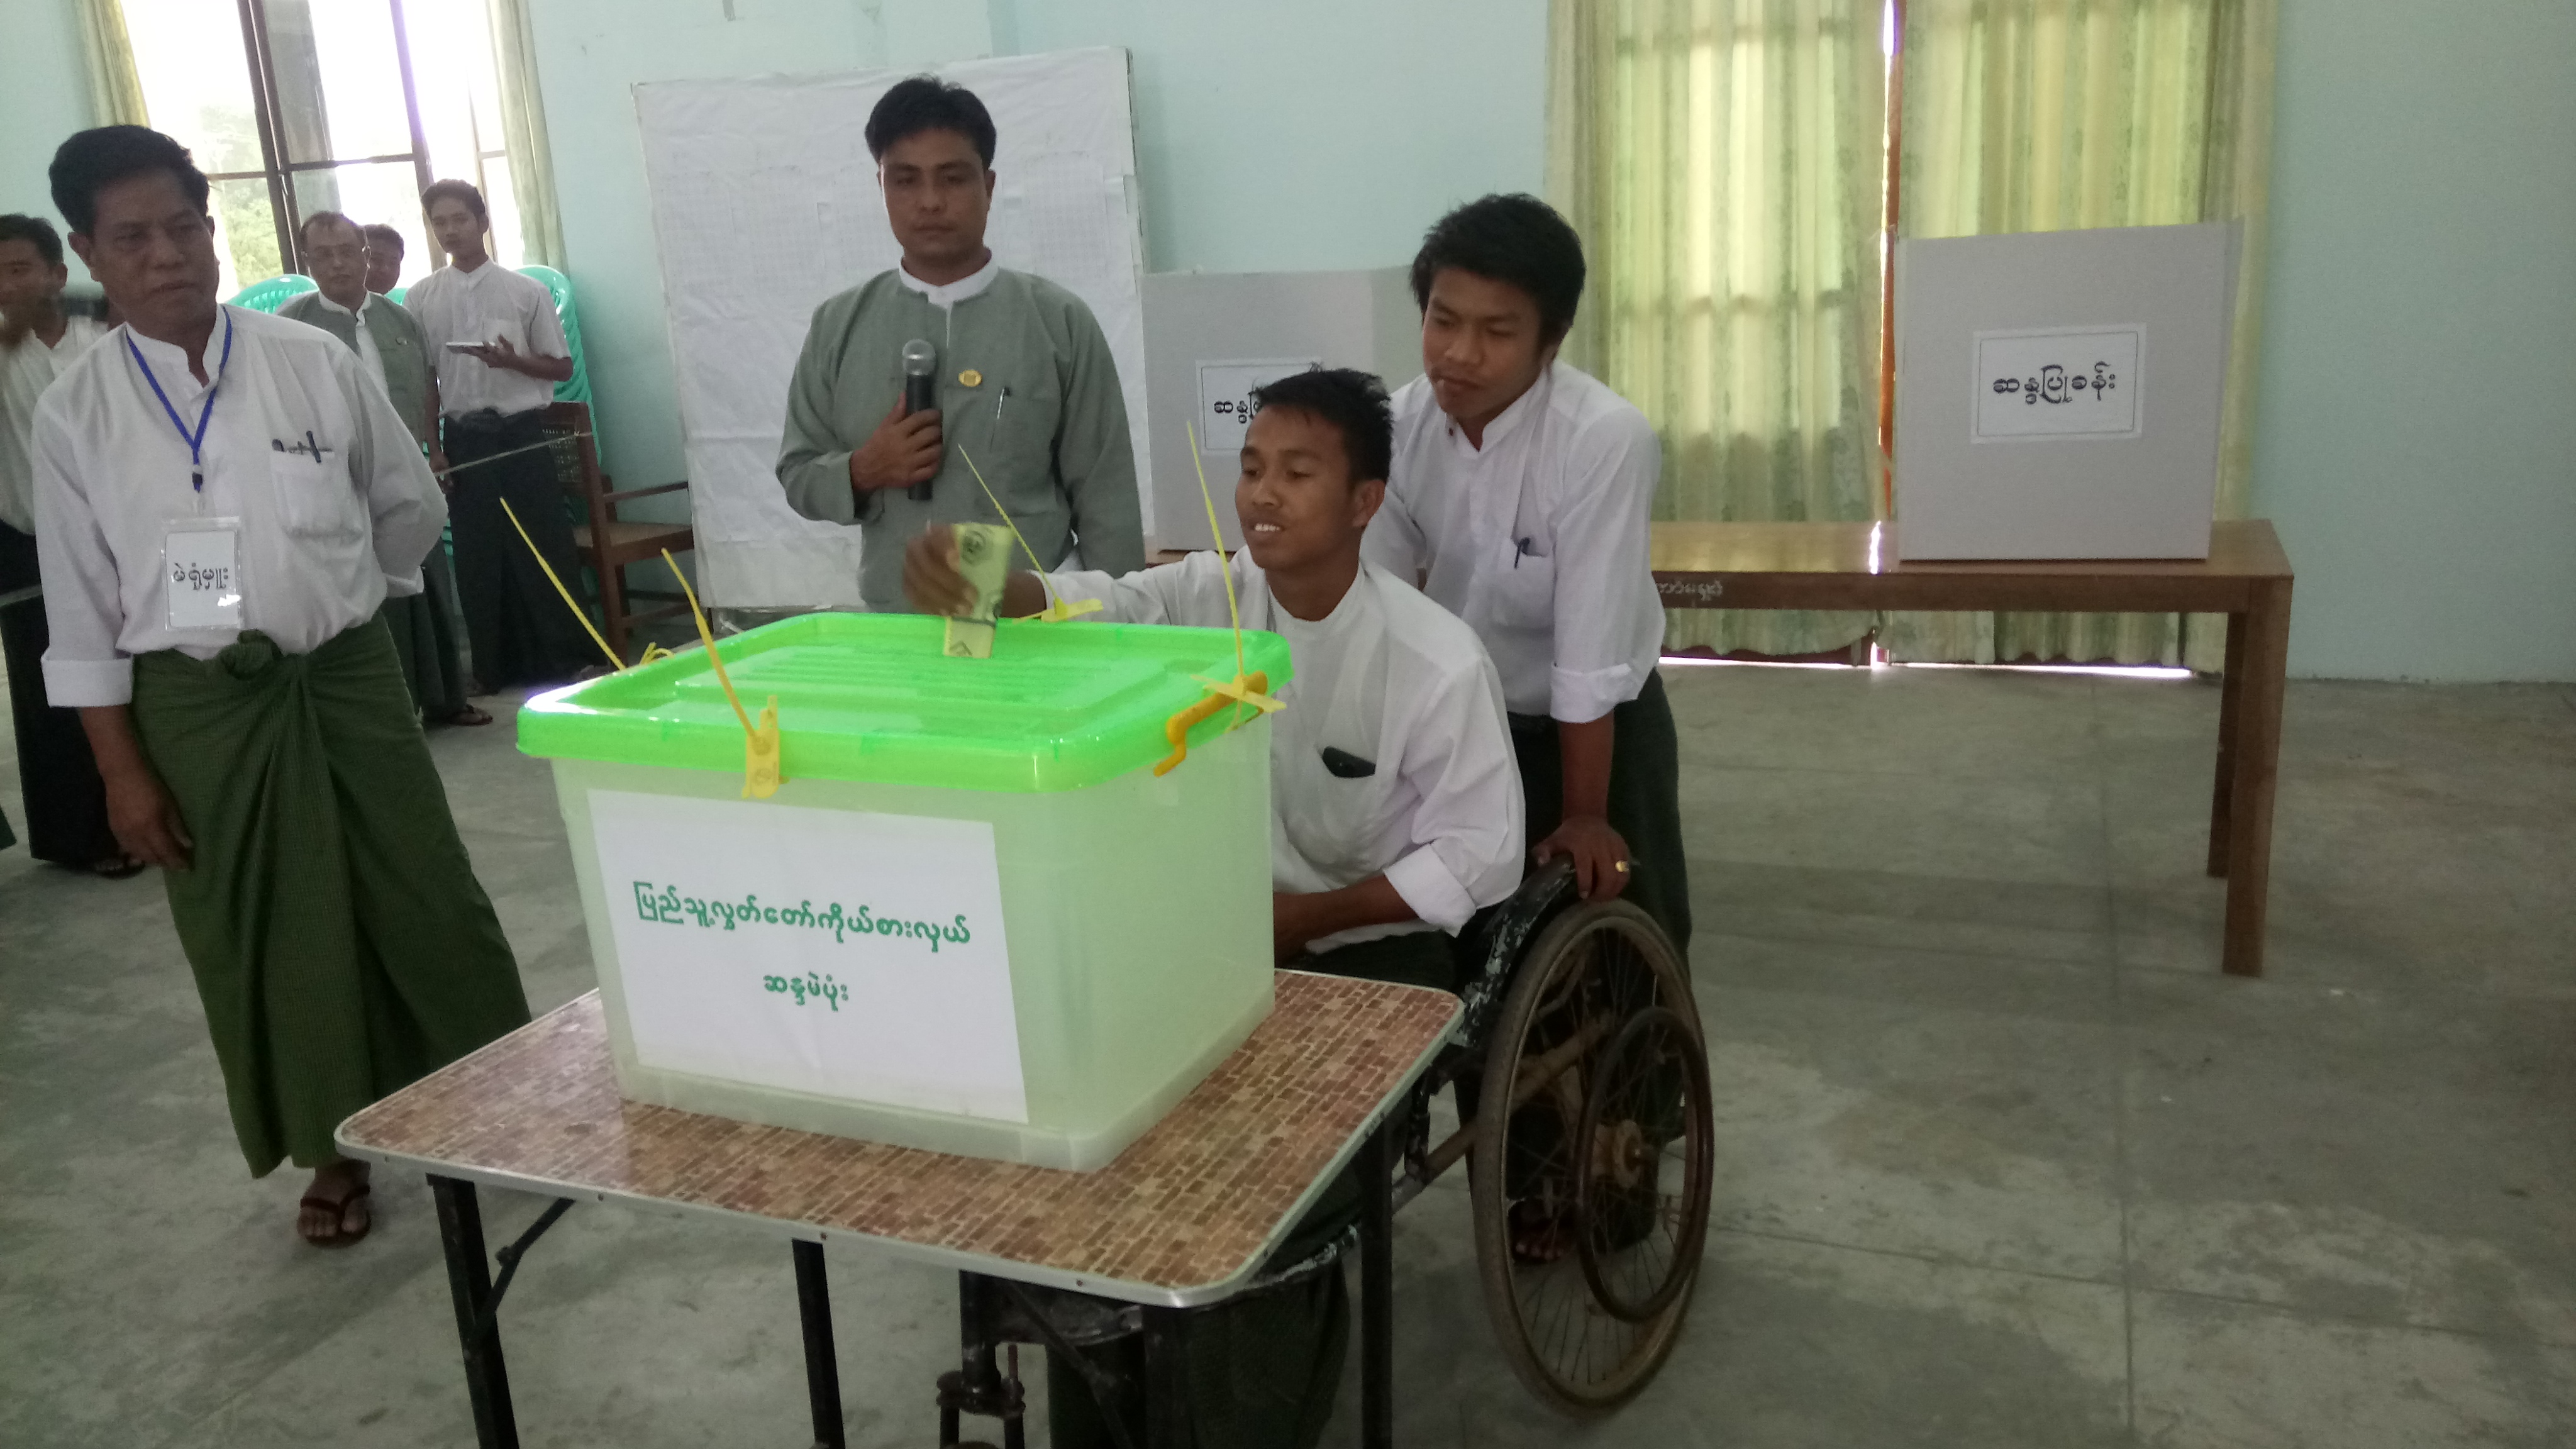 Election officials of wards and village-tracts of Monywa, Sagaing region, learning about challenges faced by Persons with Disabilities for access to polling stations - photo credit: Saket Ambarkhane